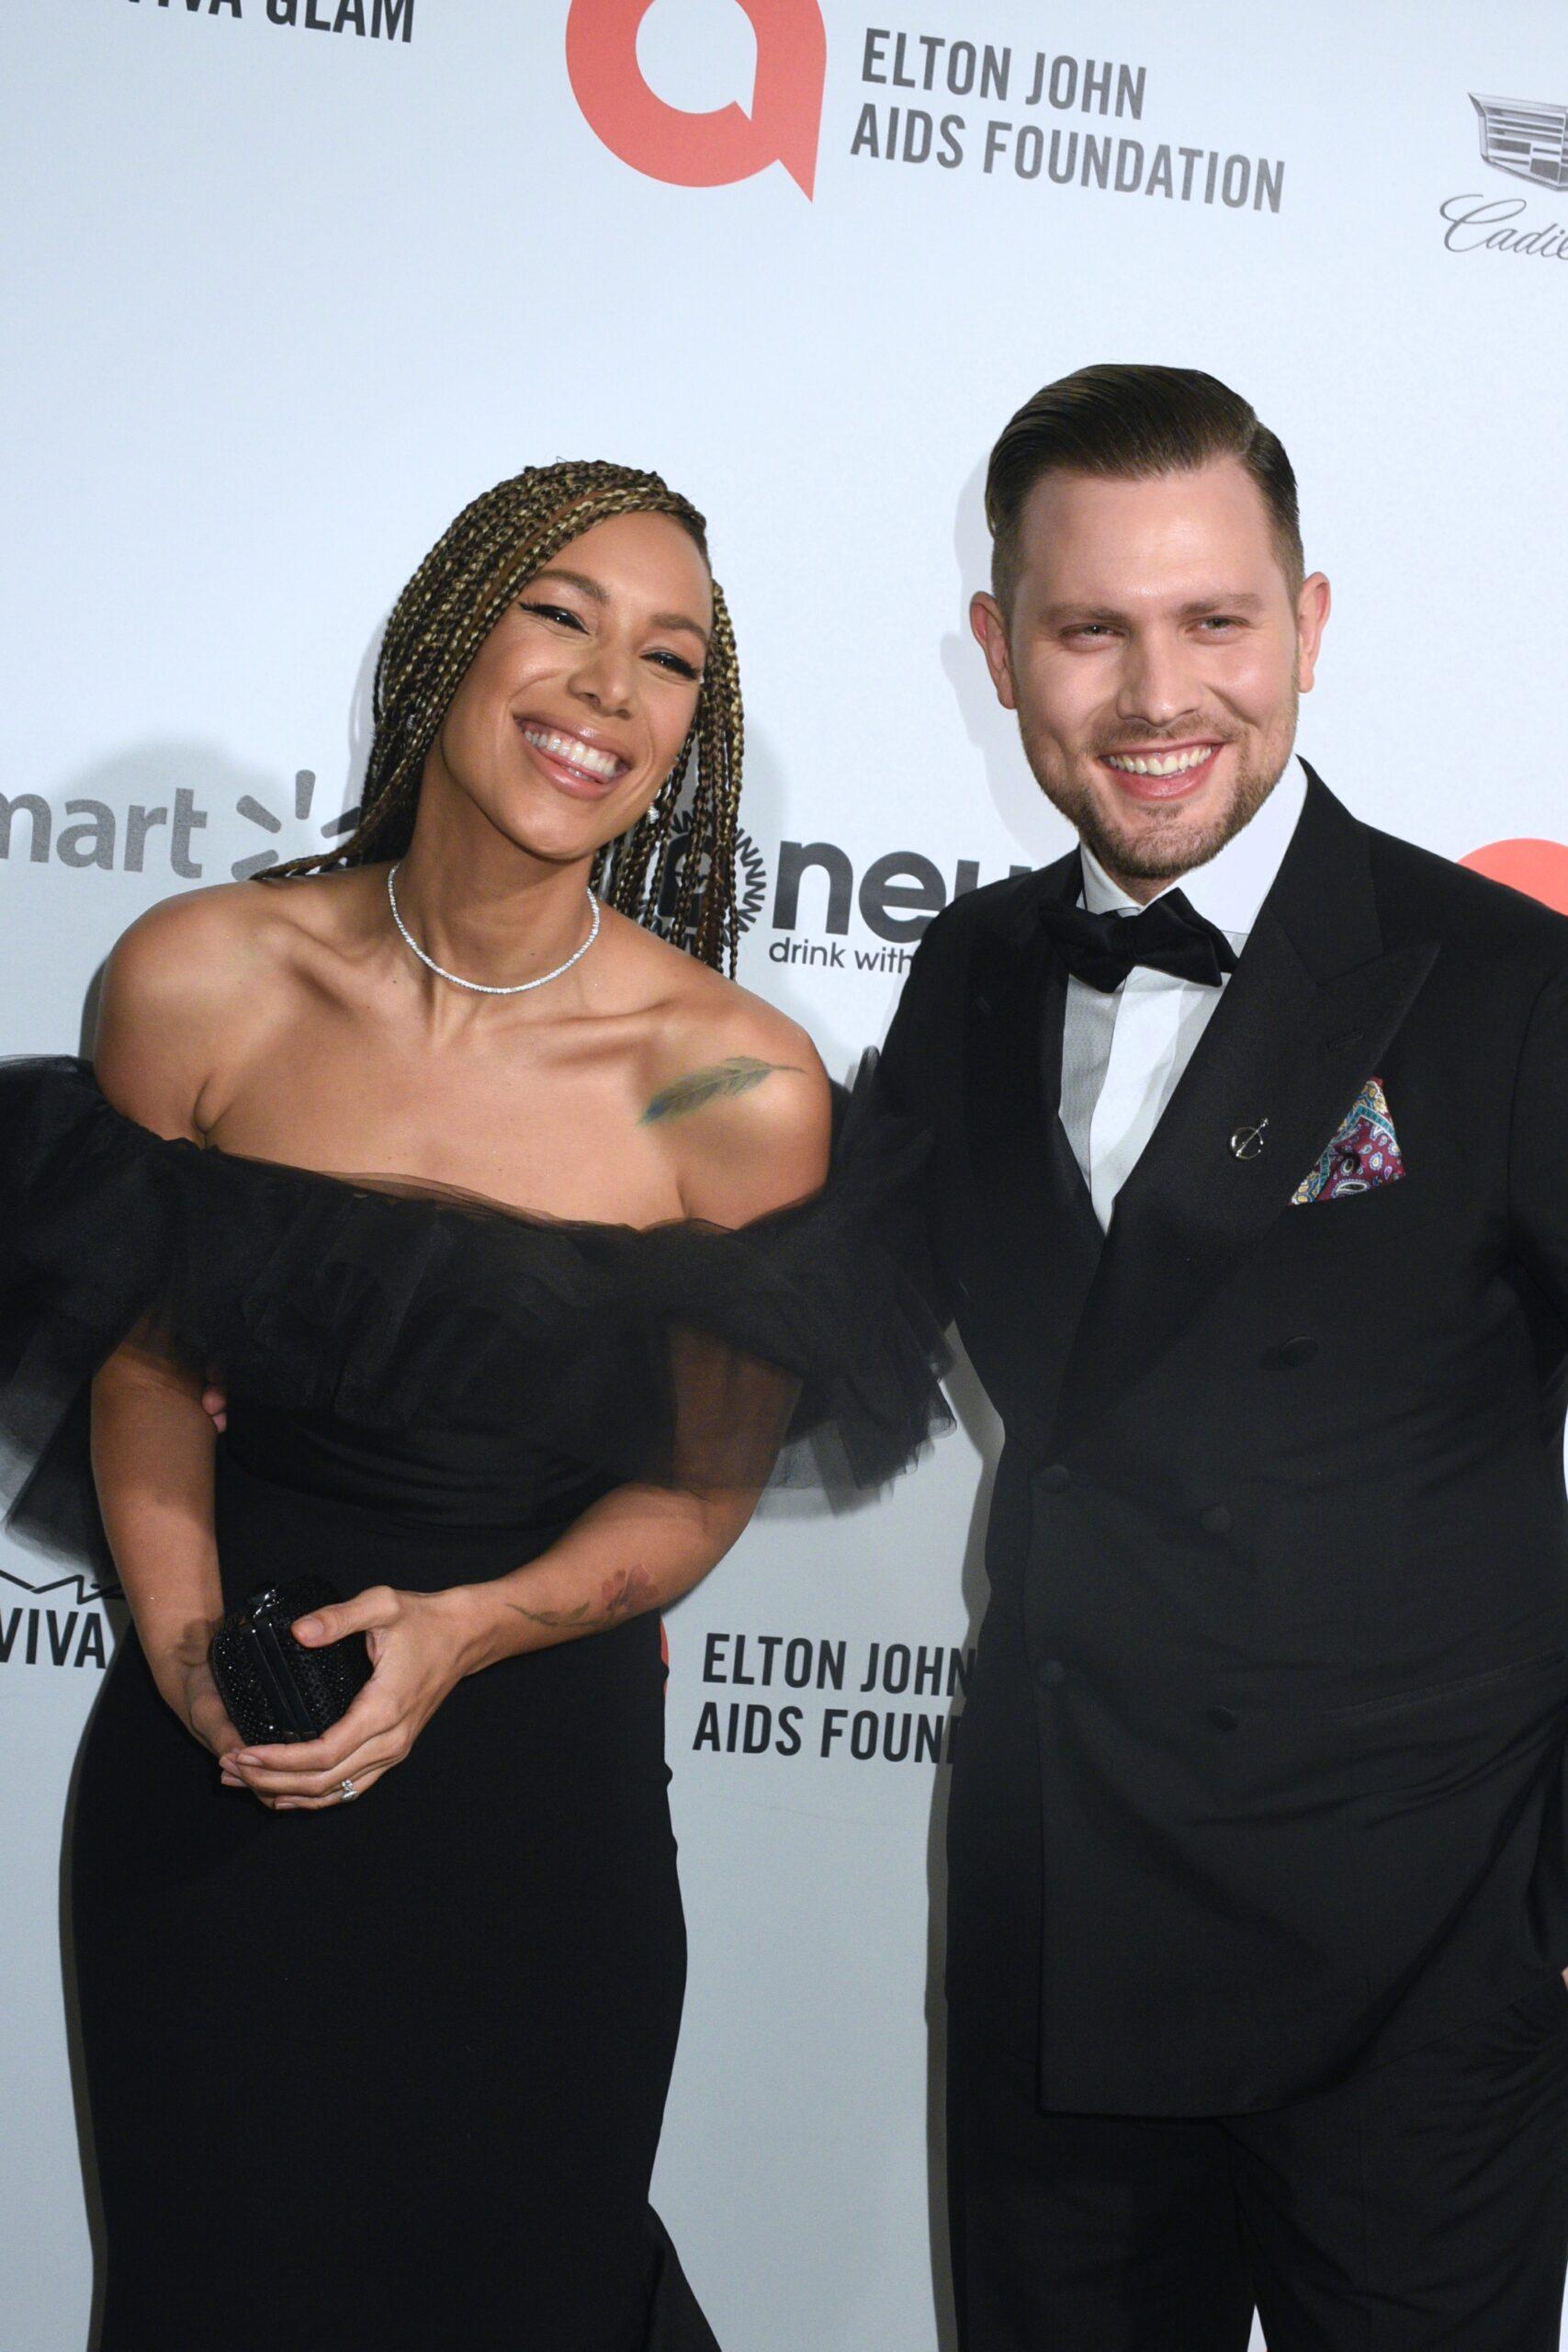 Leona Lewis and husband Dennis Jauch at CA: Elton John AIDS Foundation Oscar Viewing Party